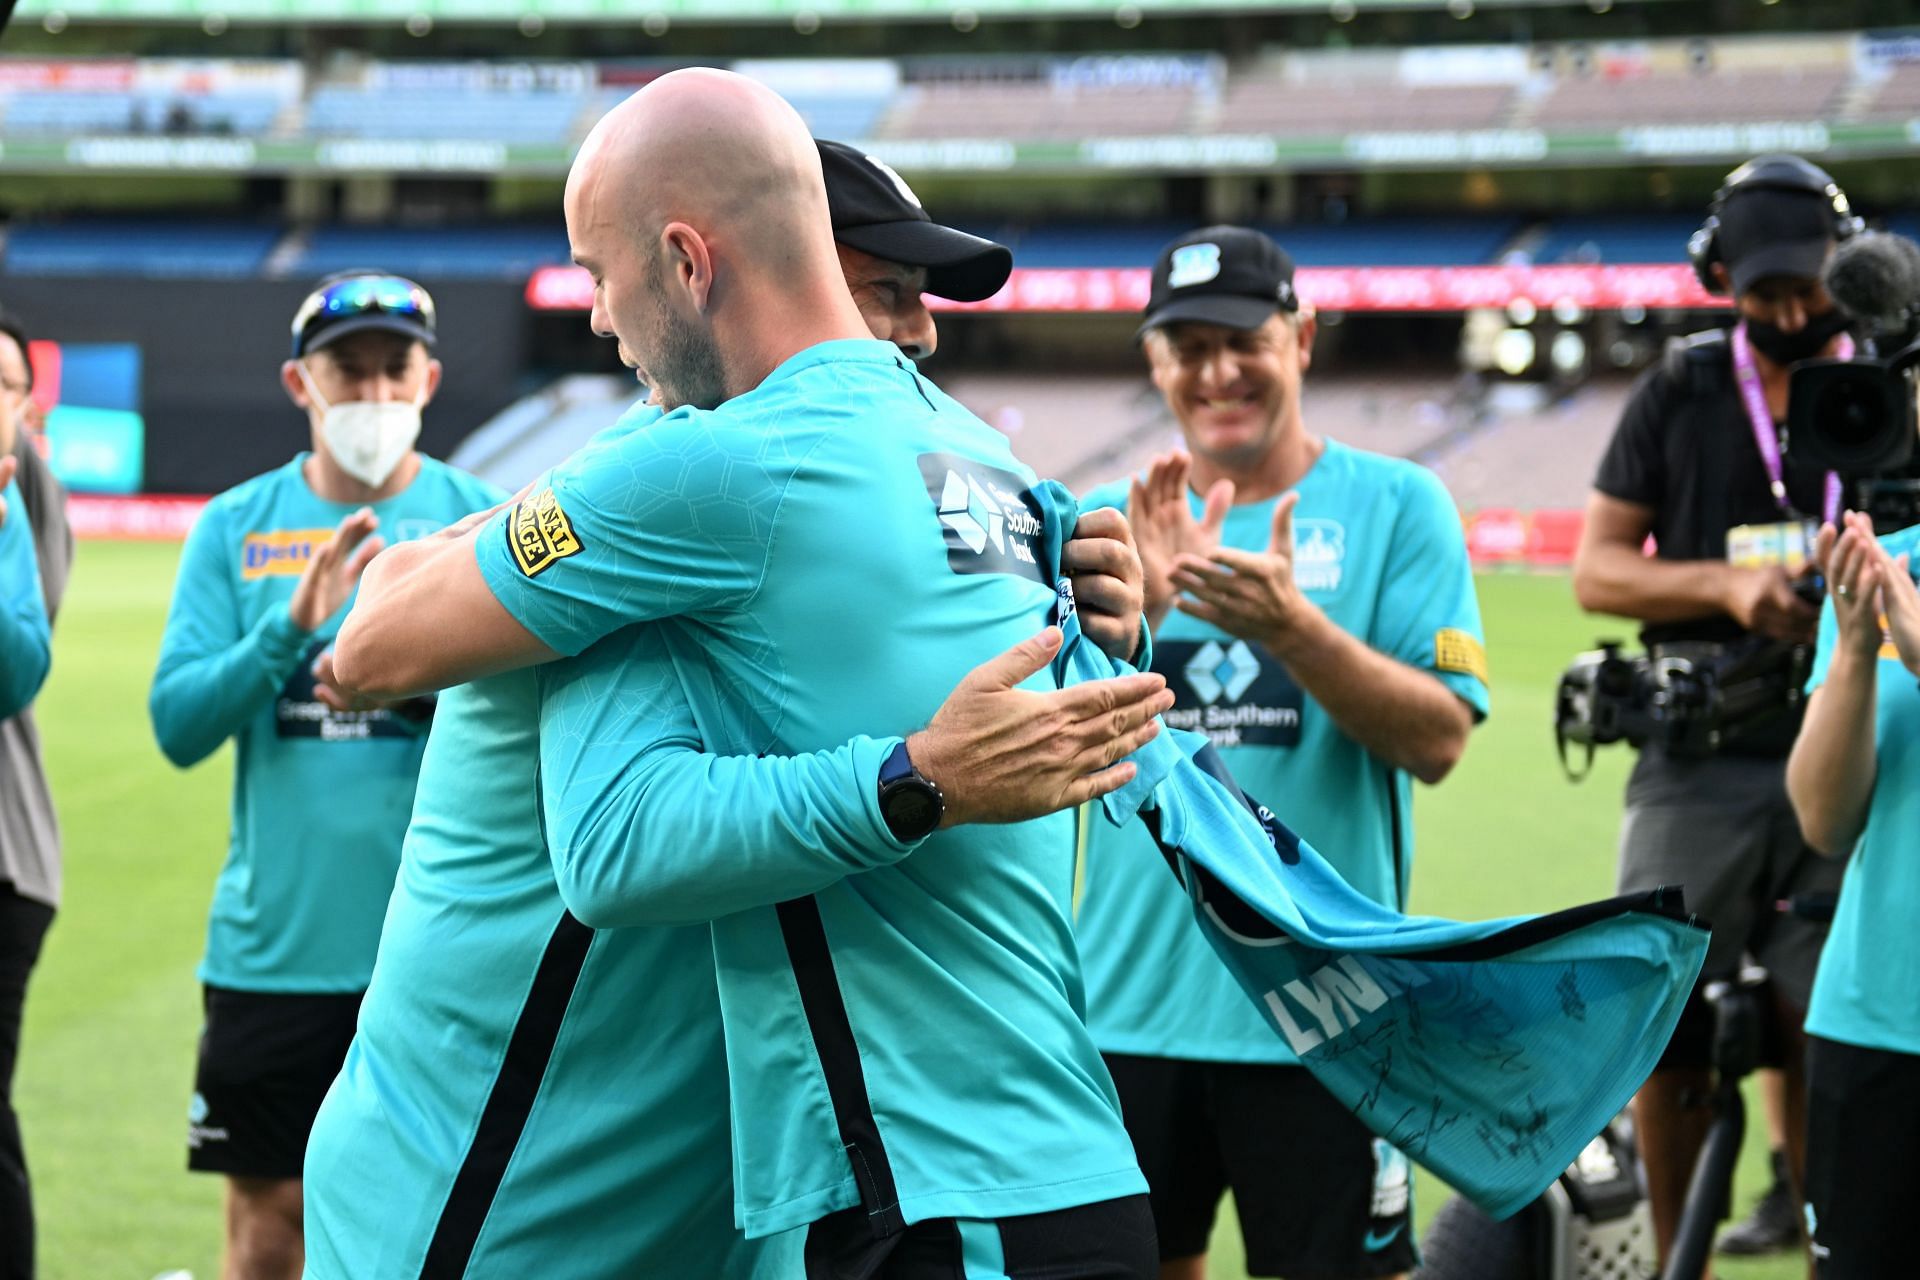 Big Bash League 2021-22, Brisbane Heat vs Sydney Sixers: Probable XI, Match Prediction, Pitch Report, Weather Forecast and Live Streaming Details